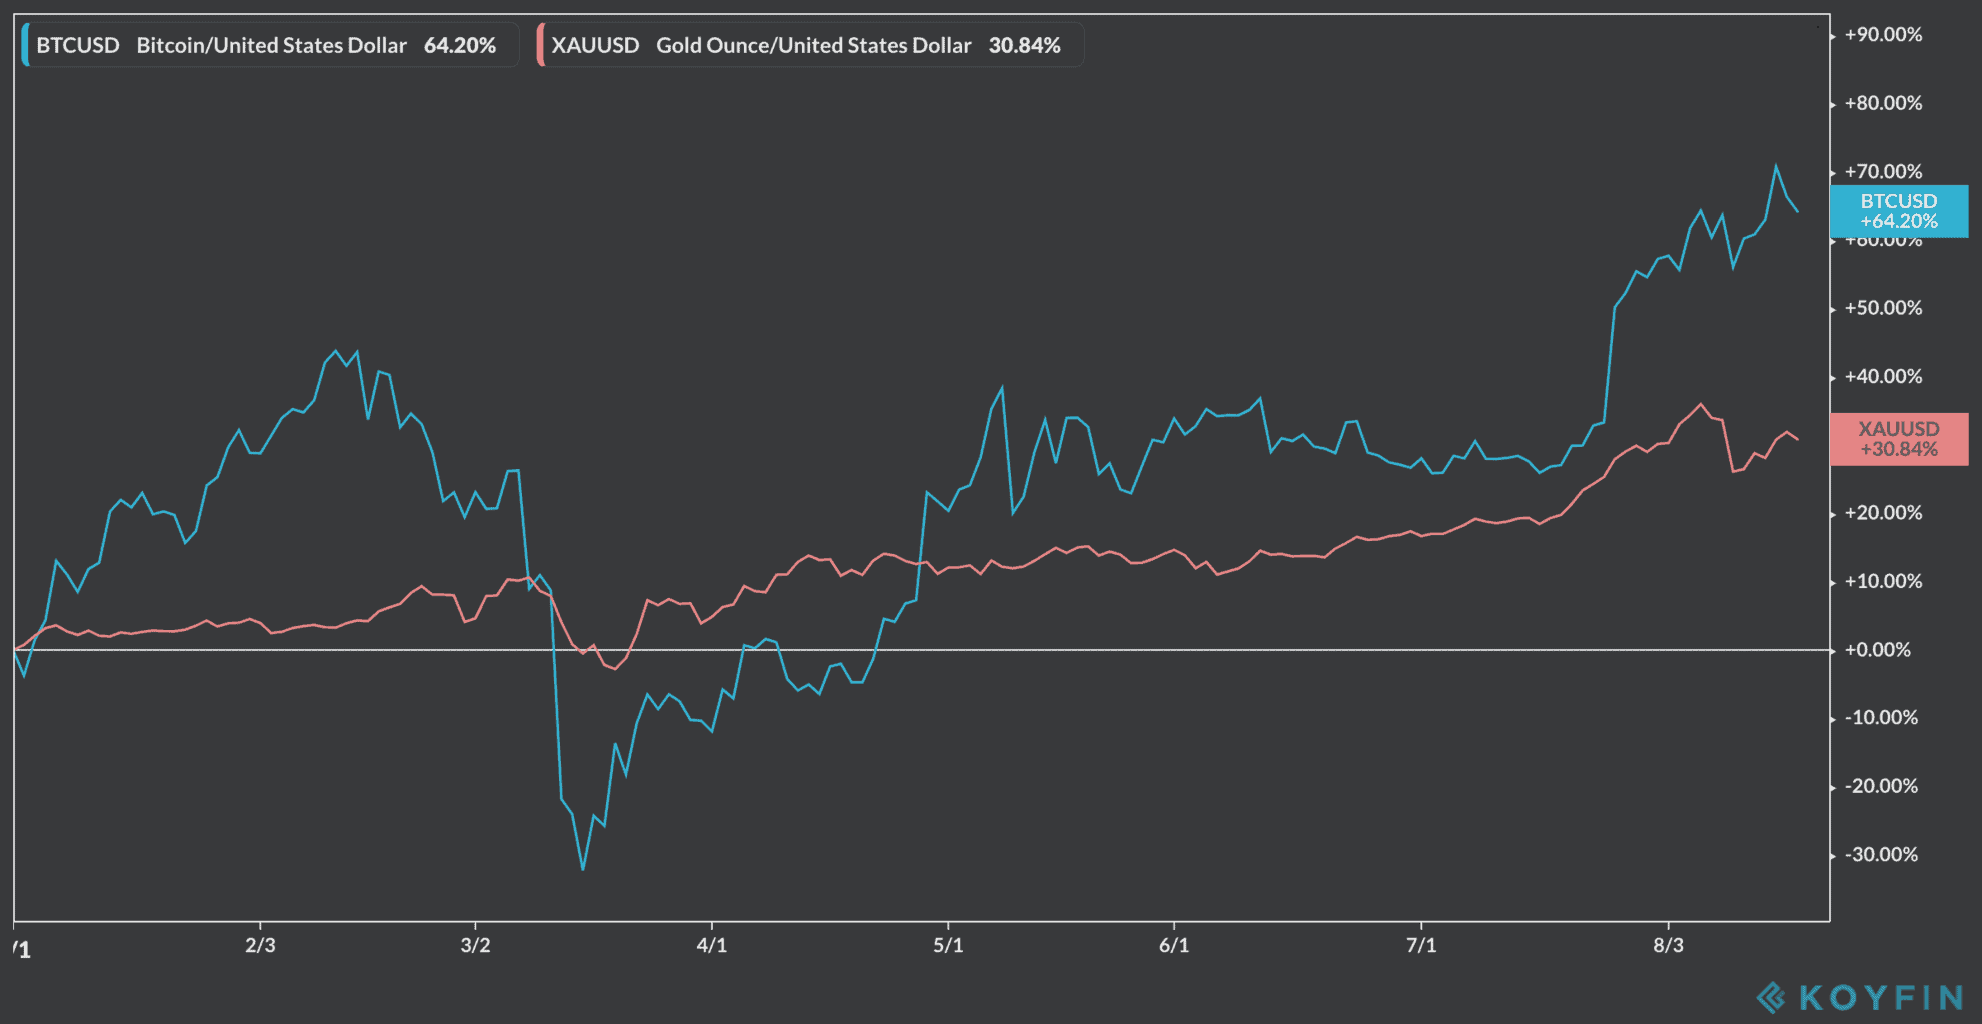 bitcoin and gold performance 2020